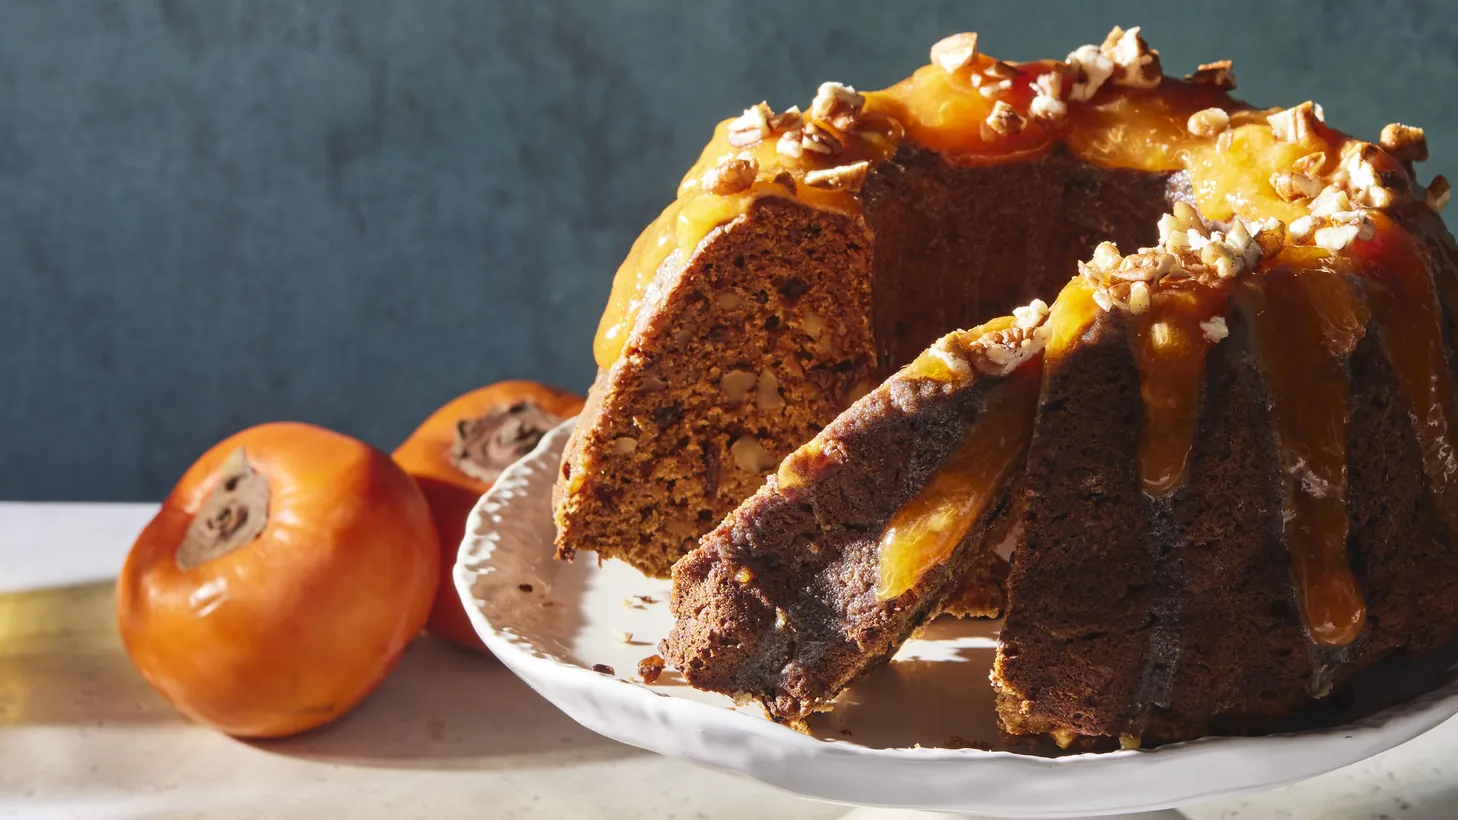 Sweet potato flour is used in place of sugar in this cake recipe and complements the persimmon flavors.